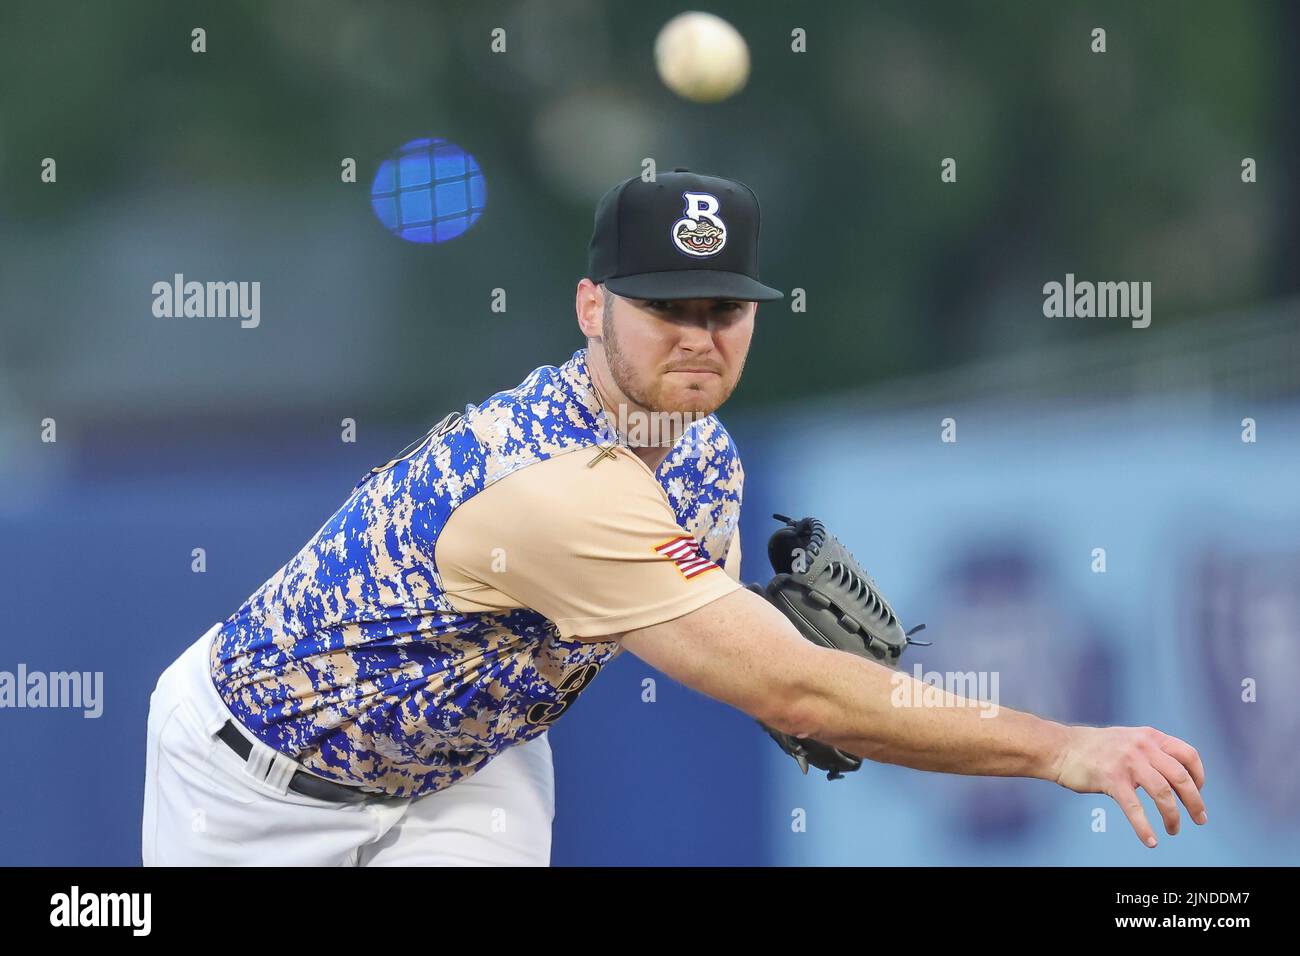 August 10, 2022: Biloxi Shuckers pitcher TJ Shook (35) pitches during an MiLB game between the Biloxi Shuckers and Rocket City Trash Pandas at MGM Park in Biloxi, Mississippi. Bobby McDuffie/CSM Stock Photo